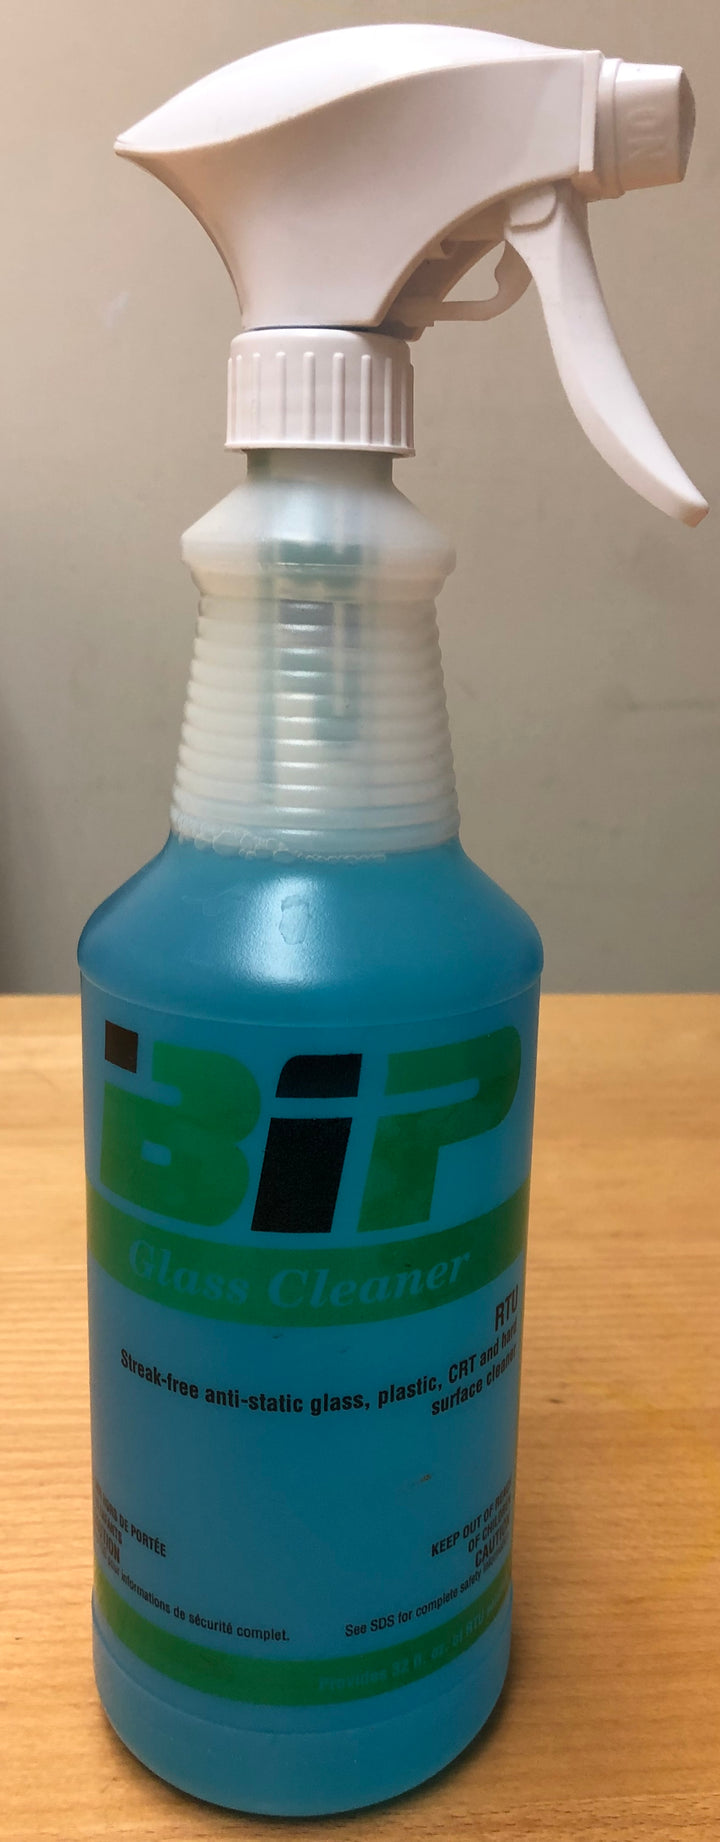 Bip - Glass Cleaner 1 Cap & Bottle With Trig